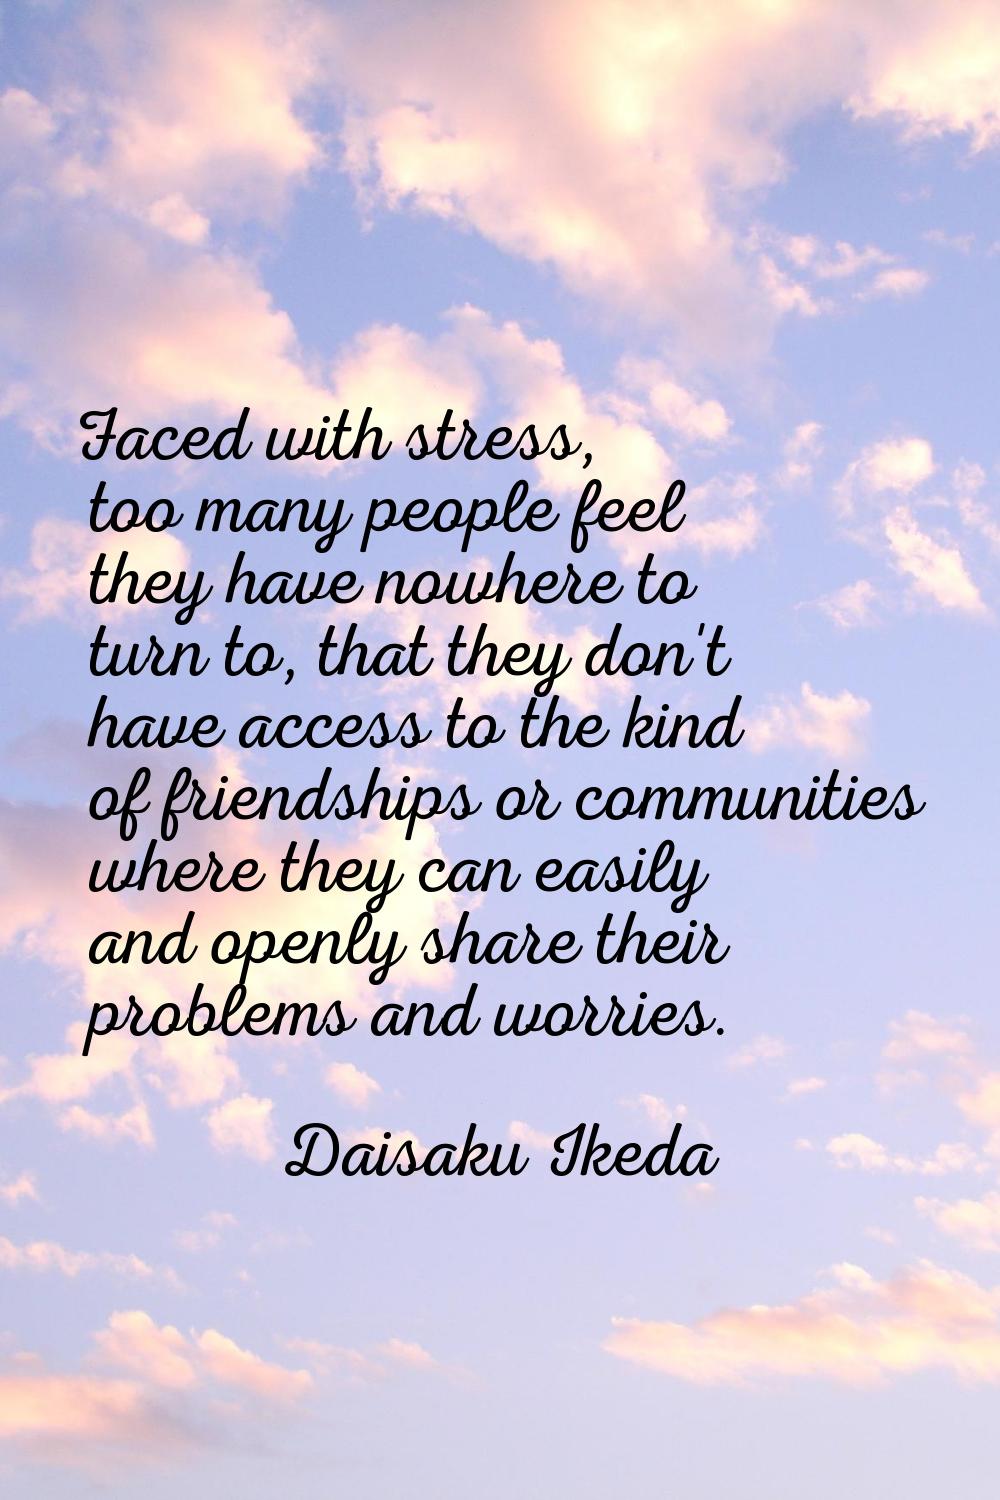 Faced with stress, too many people feel they have nowhere to turn to, that they don't have access t